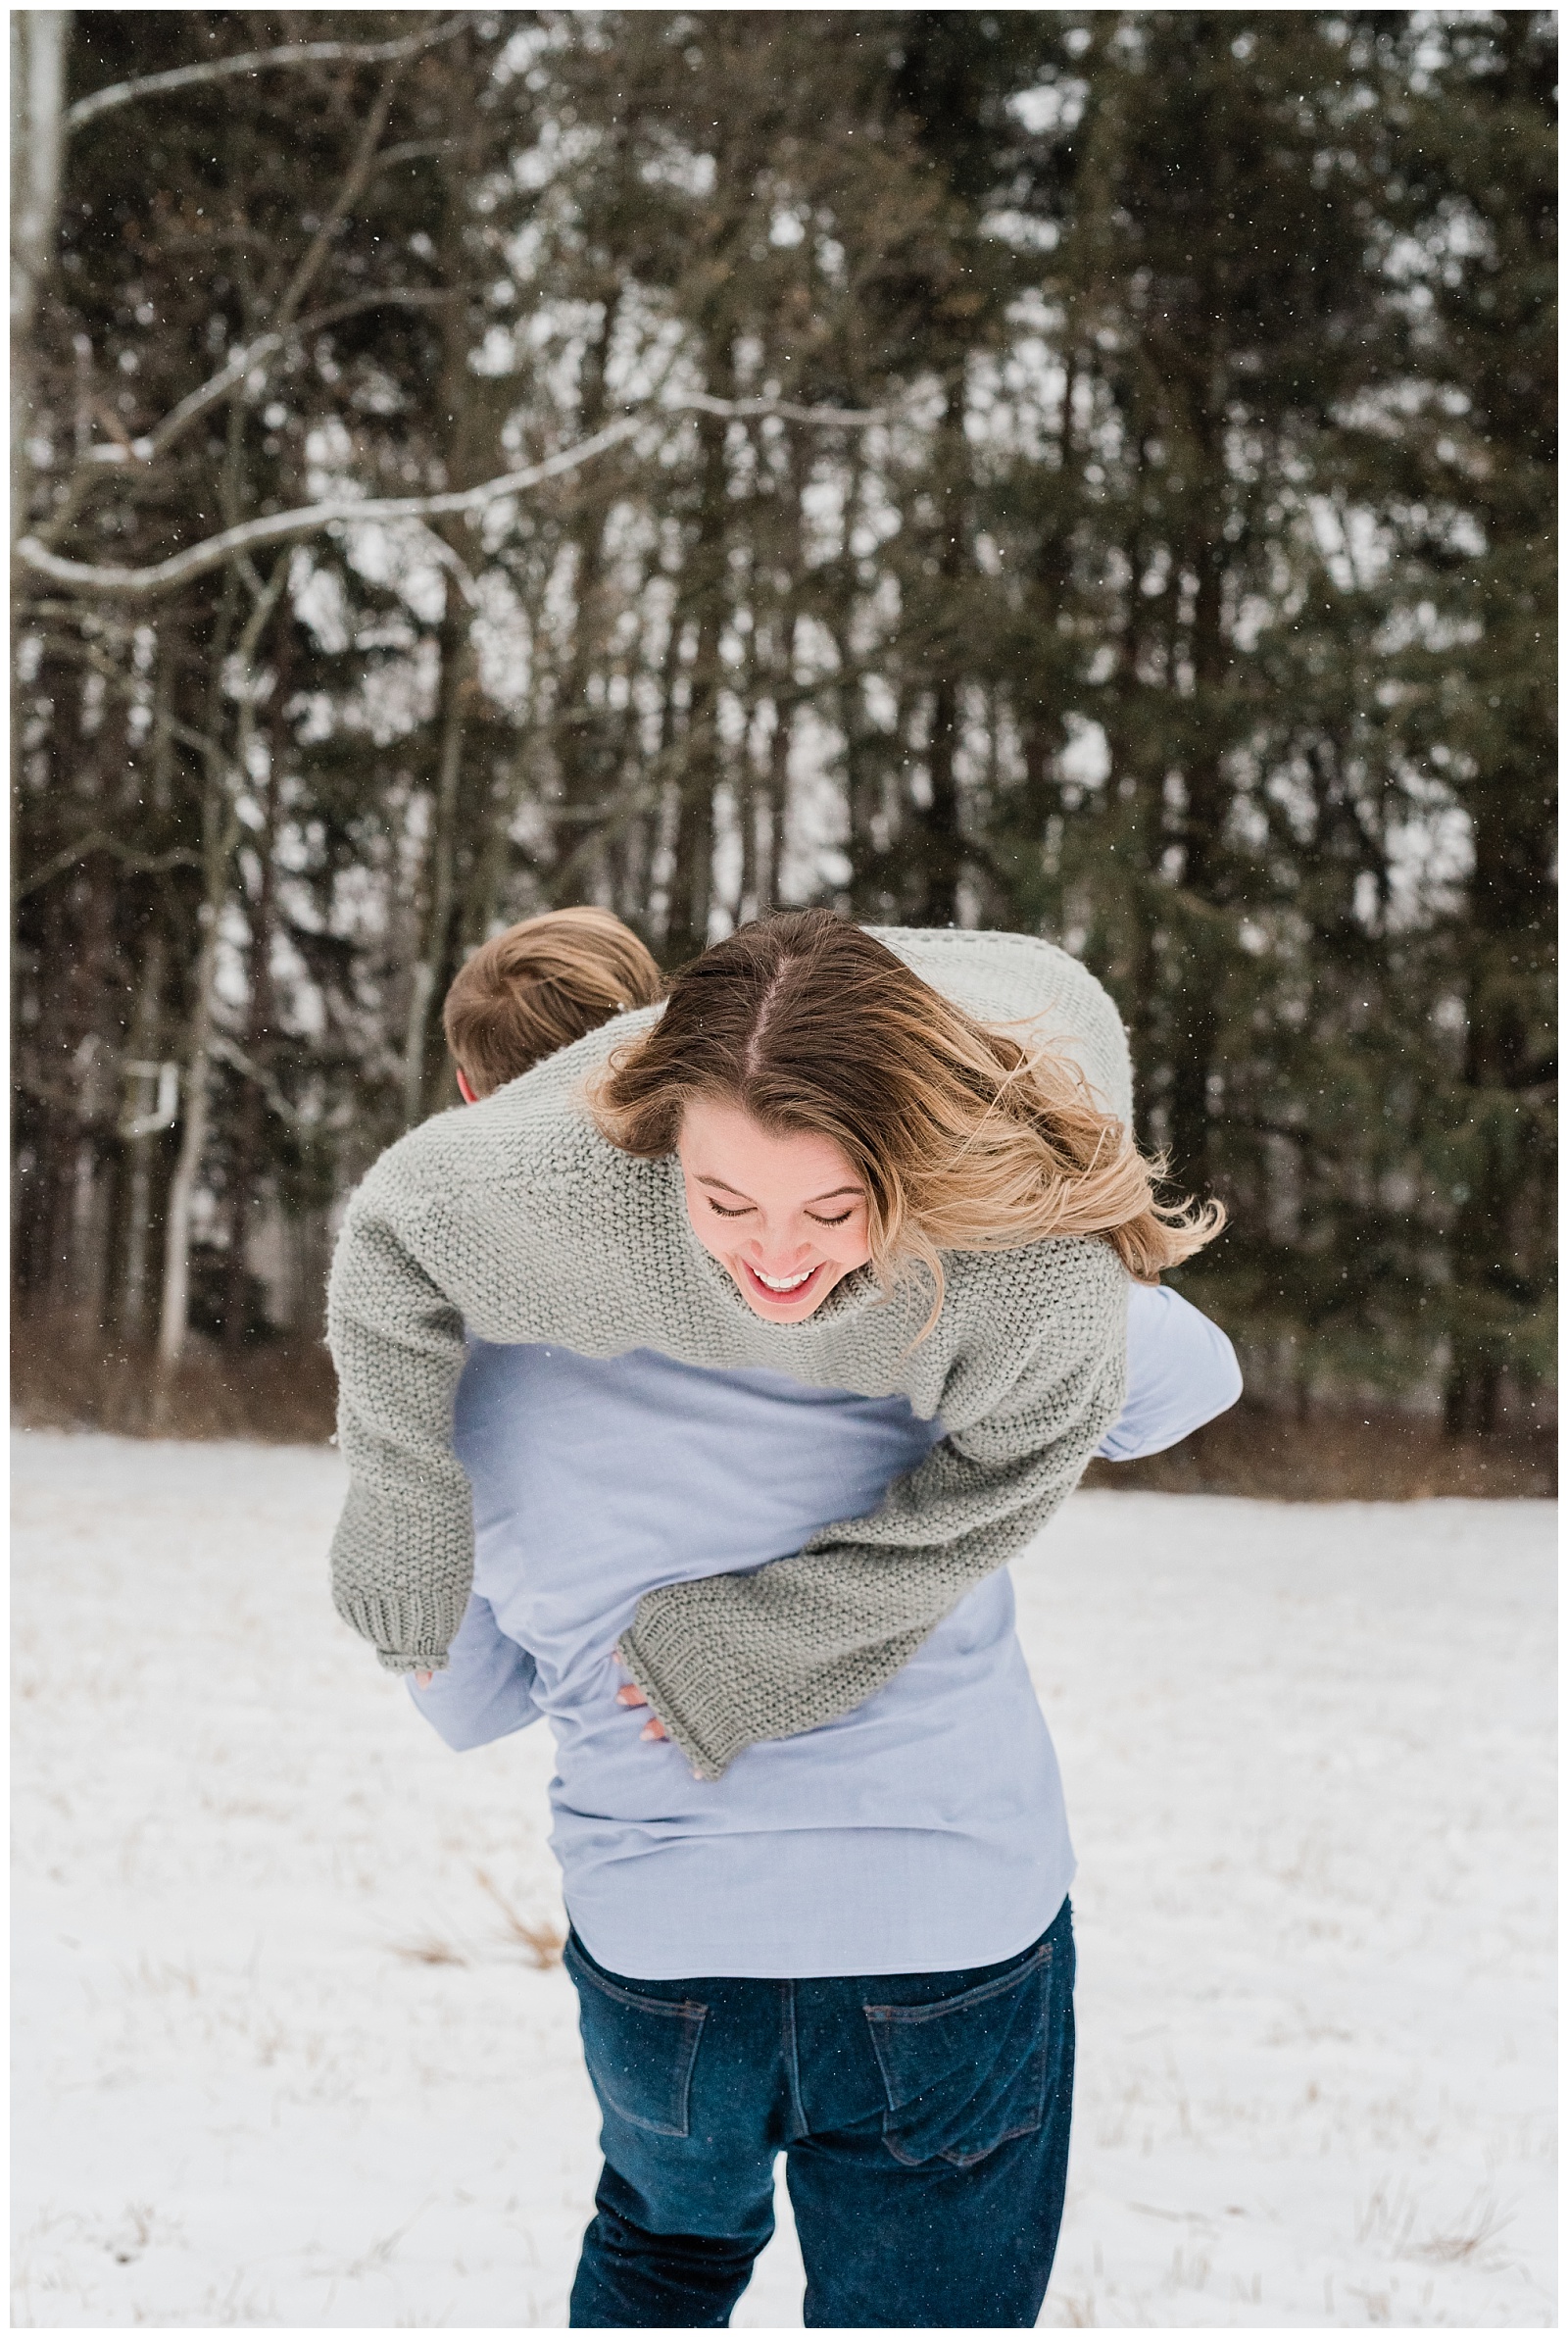 New Jersey Engagement Session, Snowy, Winter, Cozy, Session, Wedding Photographer, Cross Estate Gardens, Snow, Wintry, Light and Airy